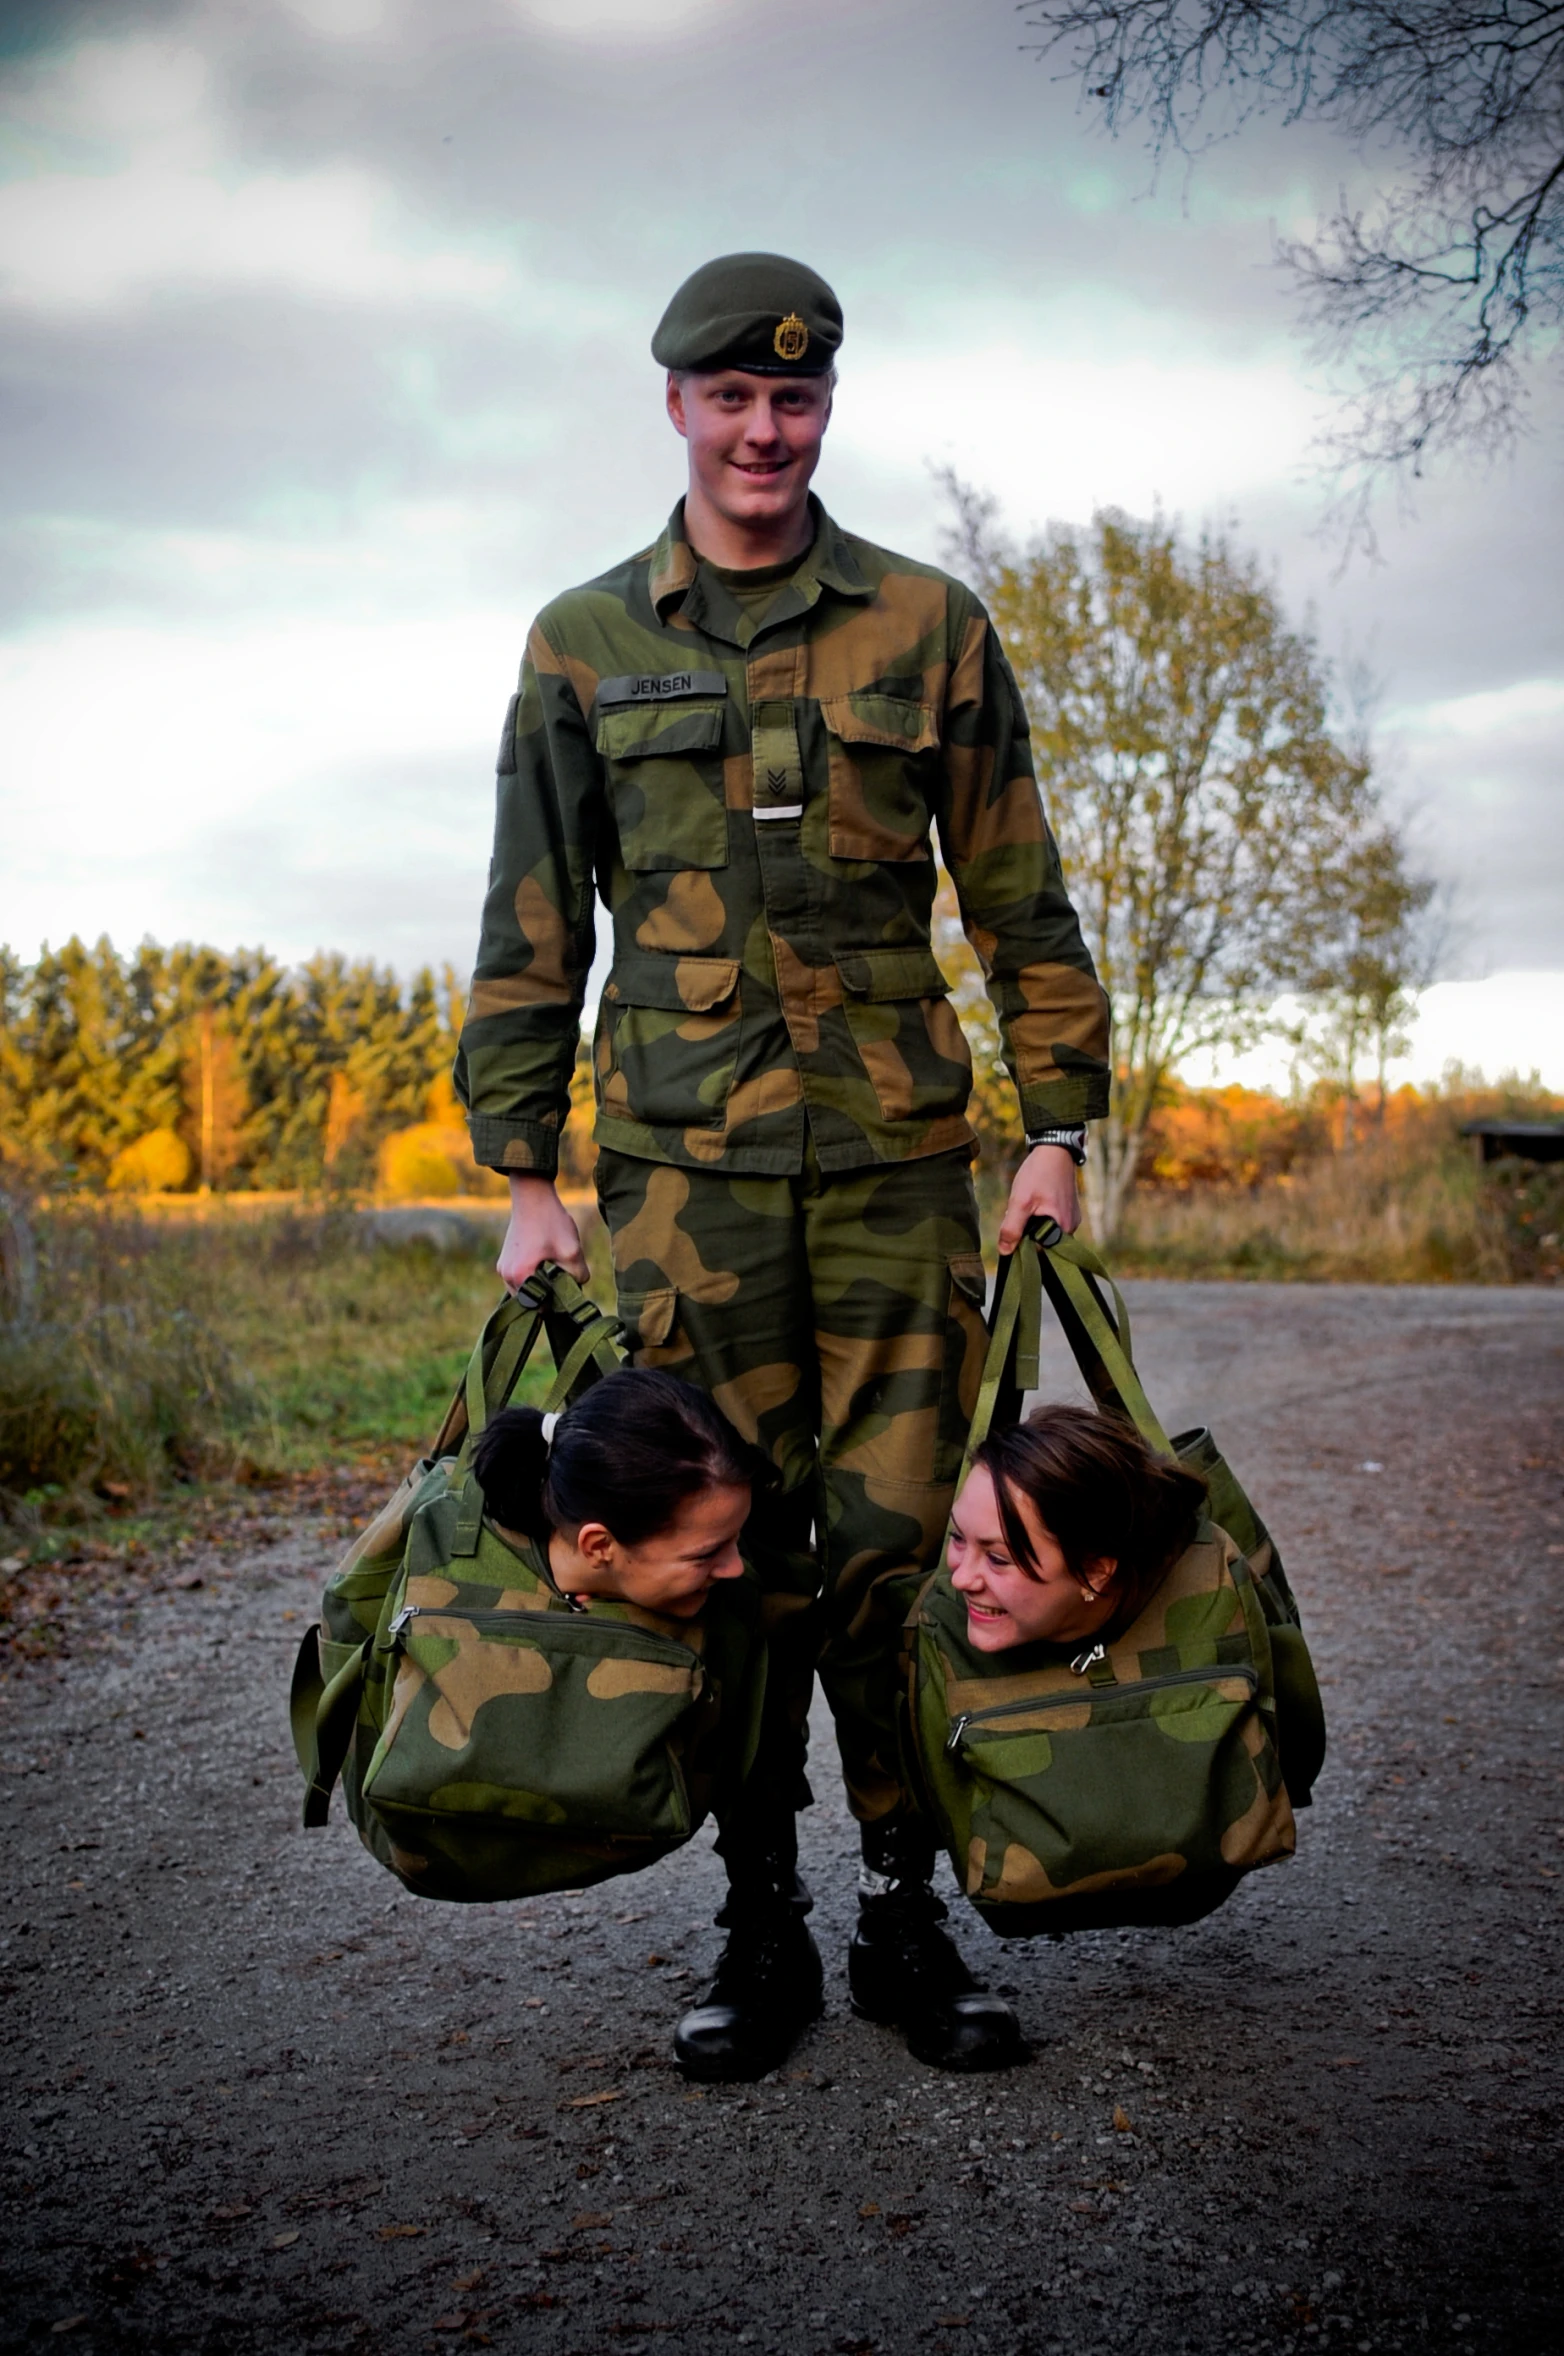 a man in military fatigues carrying luggage while holding two other persons